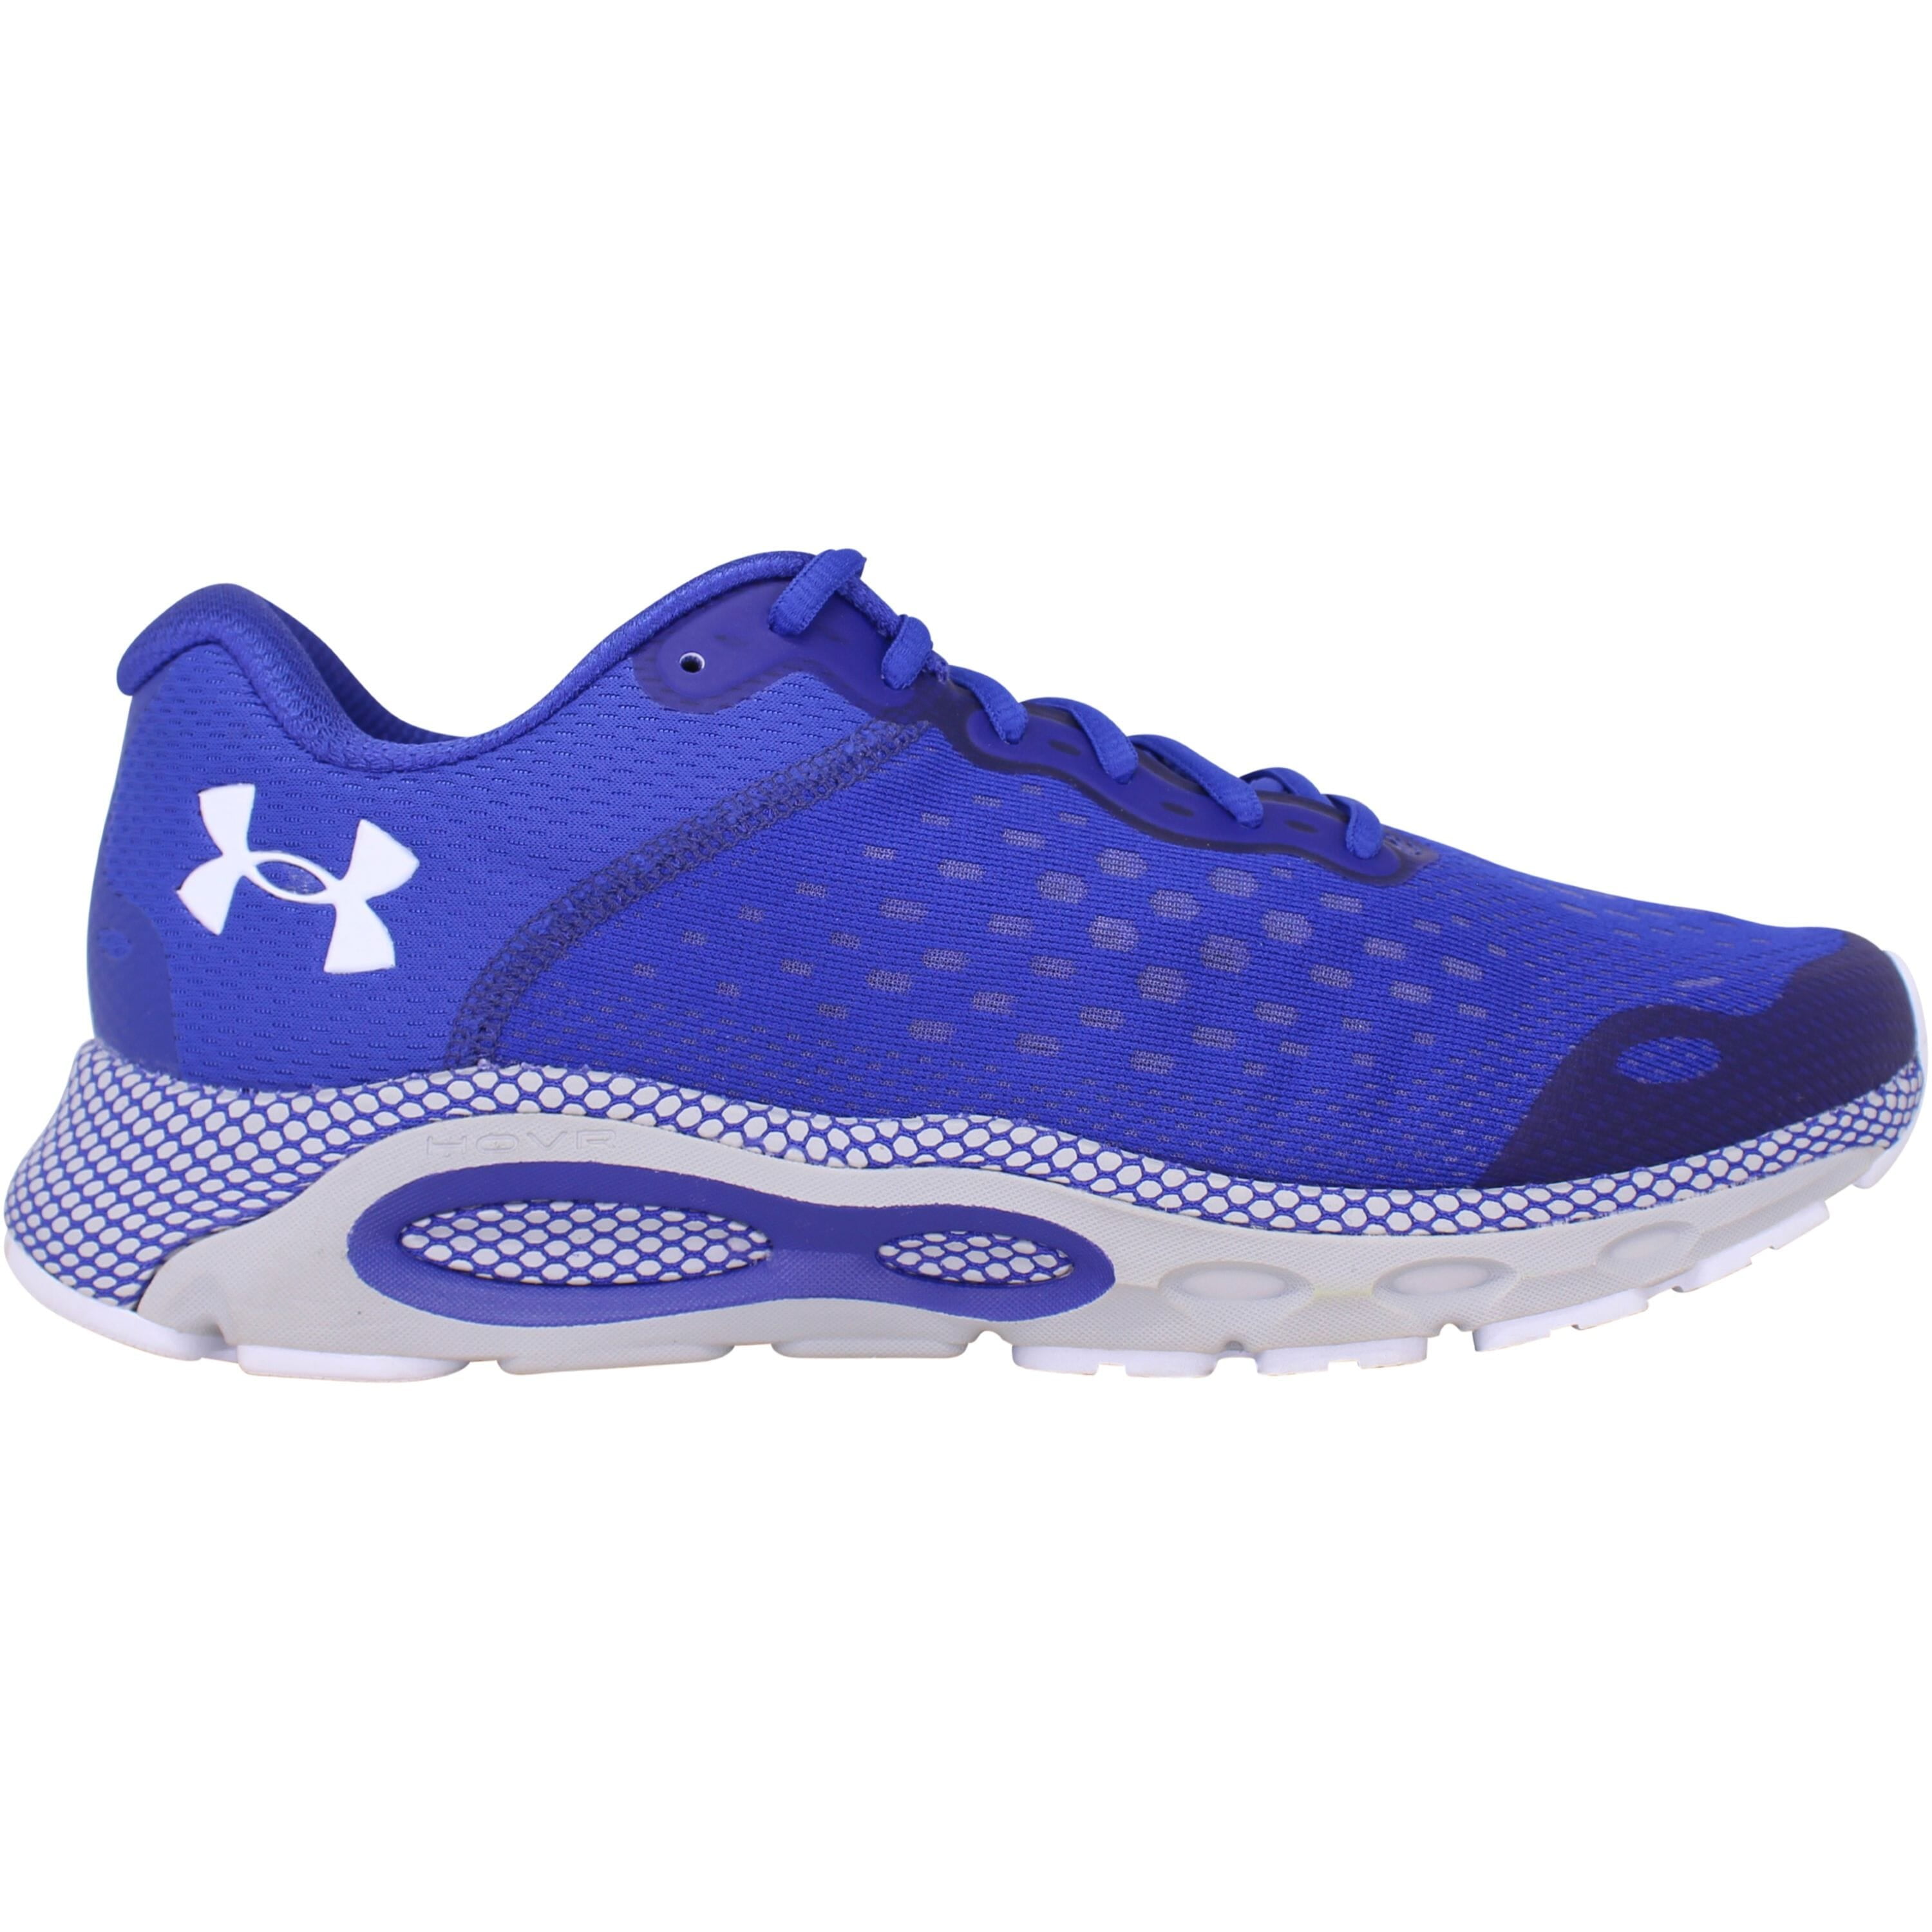 Under Armour Mens HOVR Infinite Reflect Running Shoes Trainers Sneakers Blue 